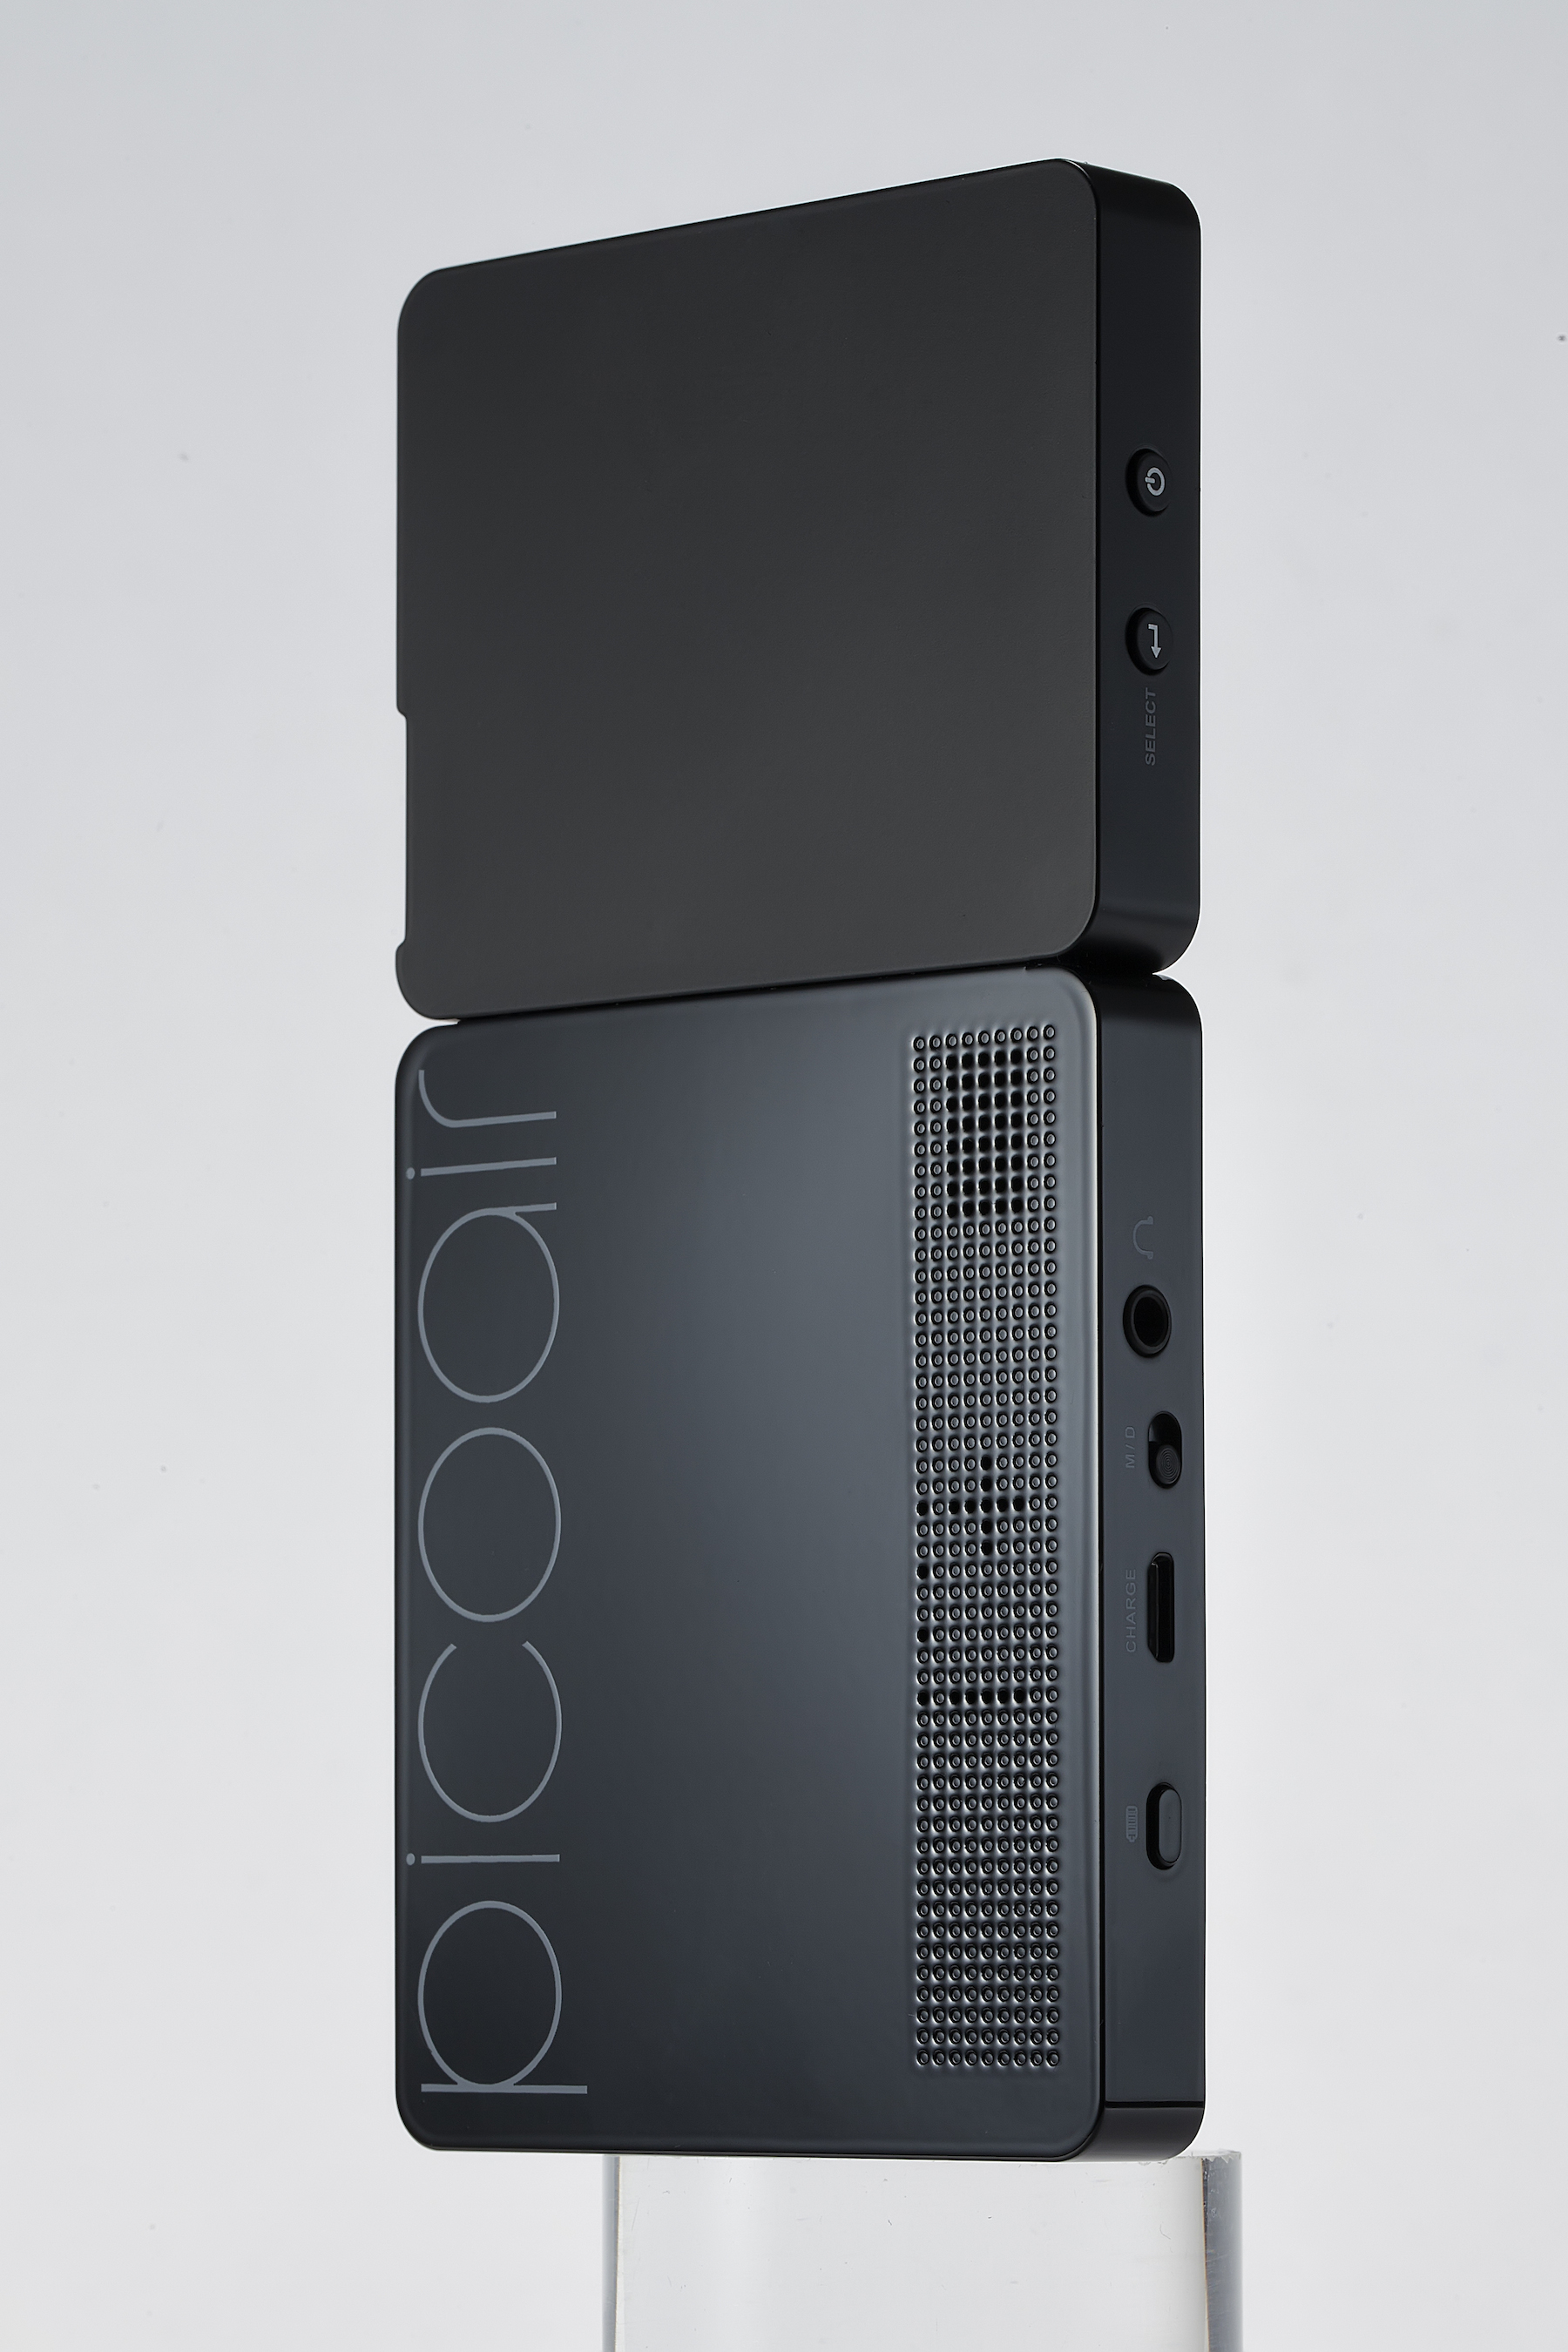 PicoAir HD Laser Pico Projector by Celluon